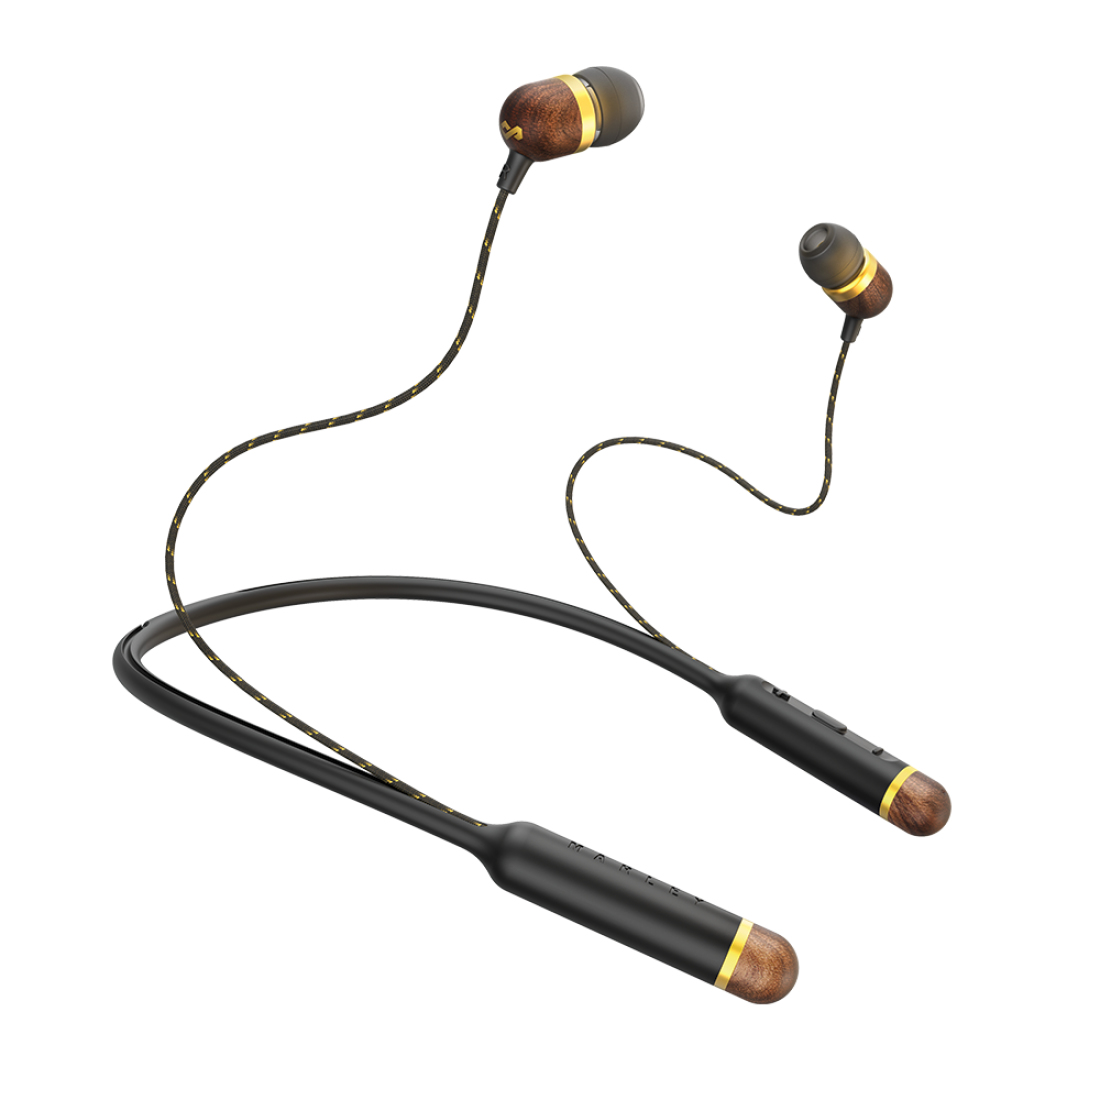 The House of Marley Smile Jamaica Brass Bluetooth In-Ear Earphones